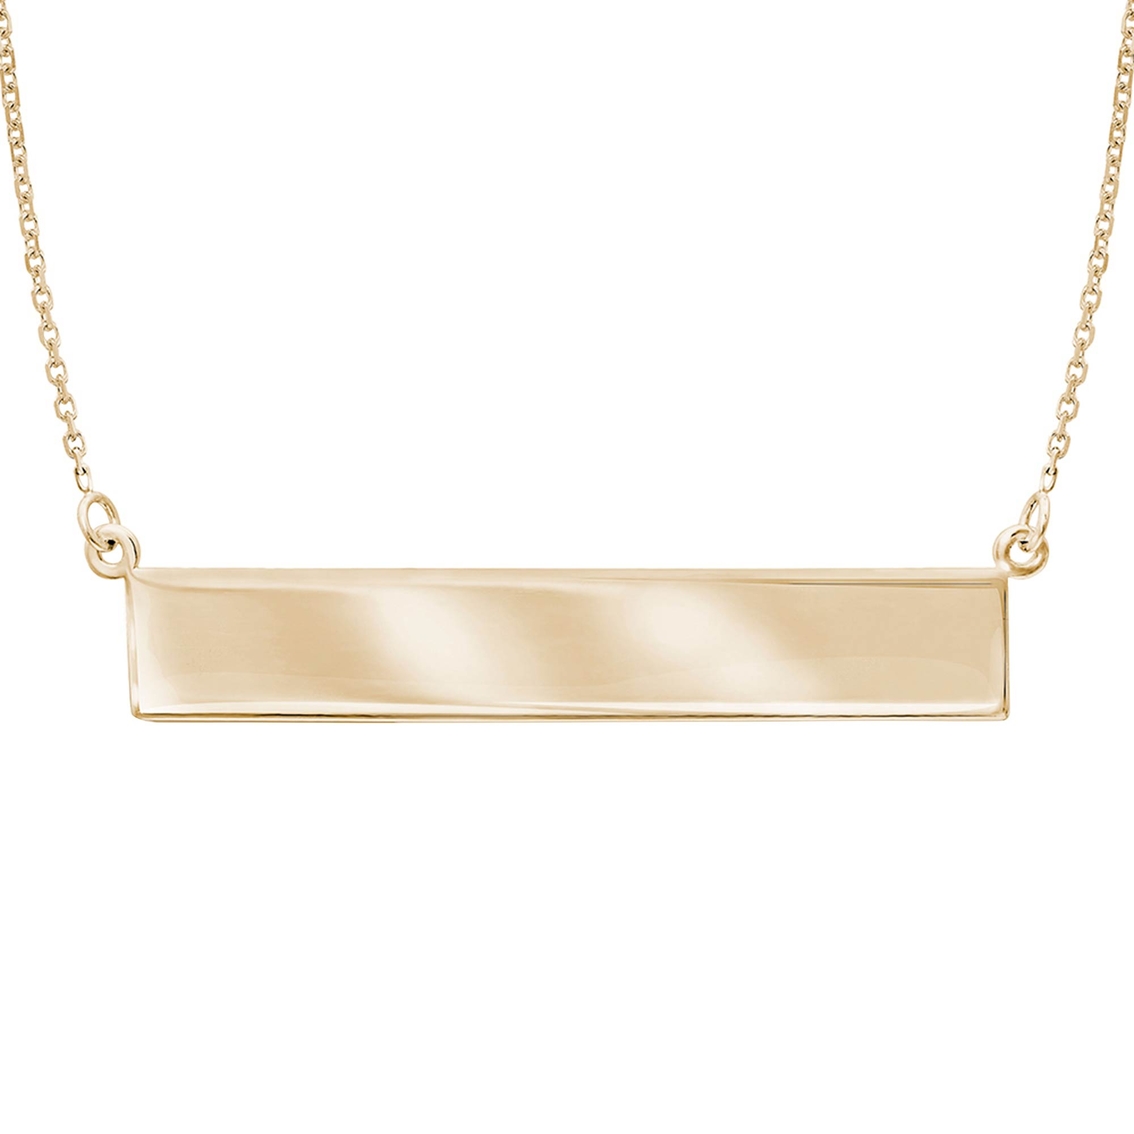 Stick Bar Necklace PM169 14k Solid Gold Bar Necklace chain 